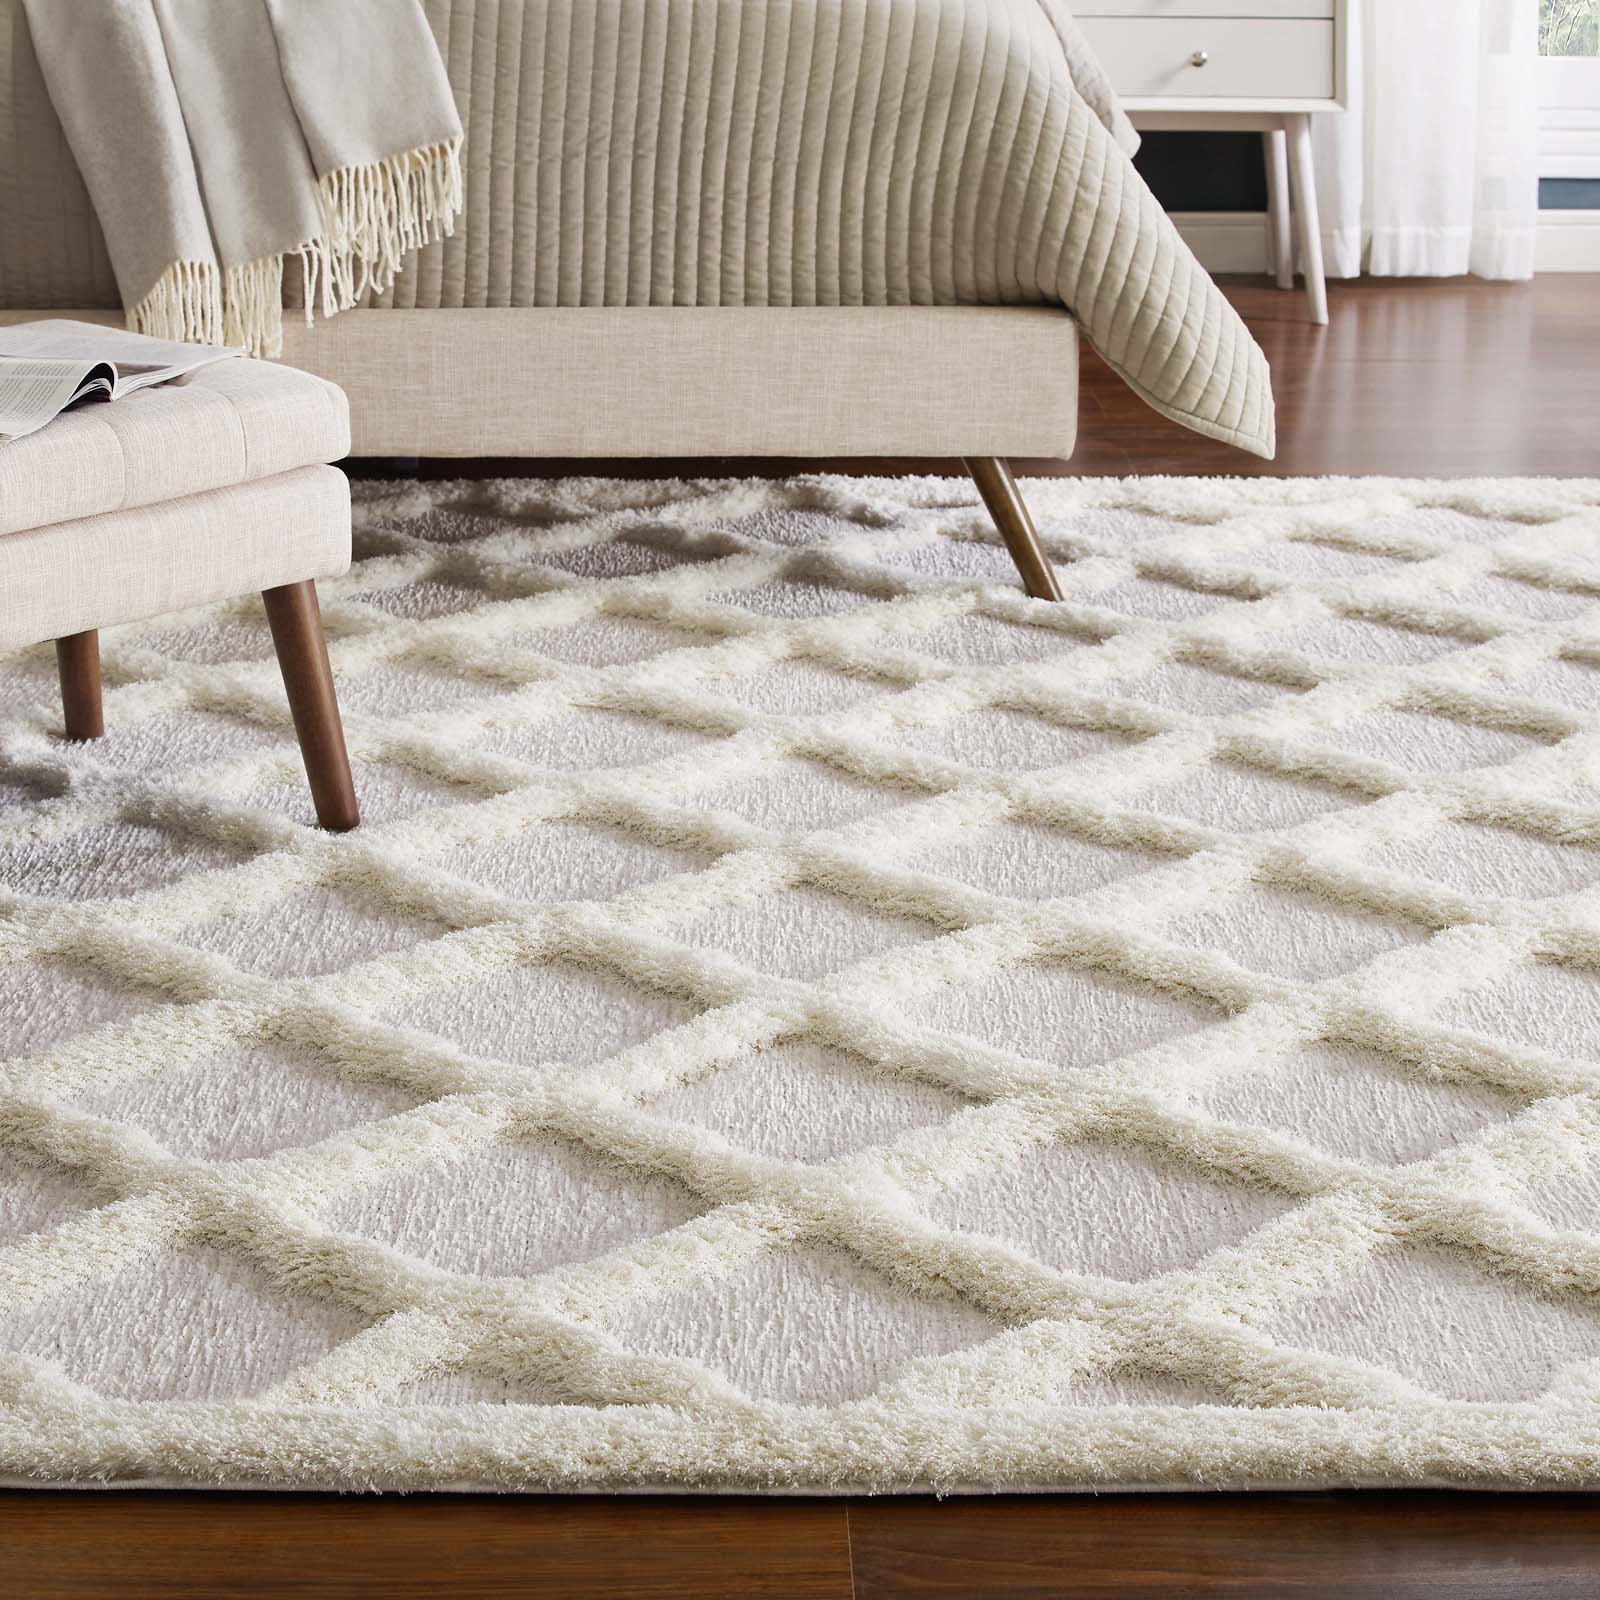 Whimsical Regale Abstract Moroccan Trellis 5x8 Shag Area Rug - East Shore Modern Home Furnishings